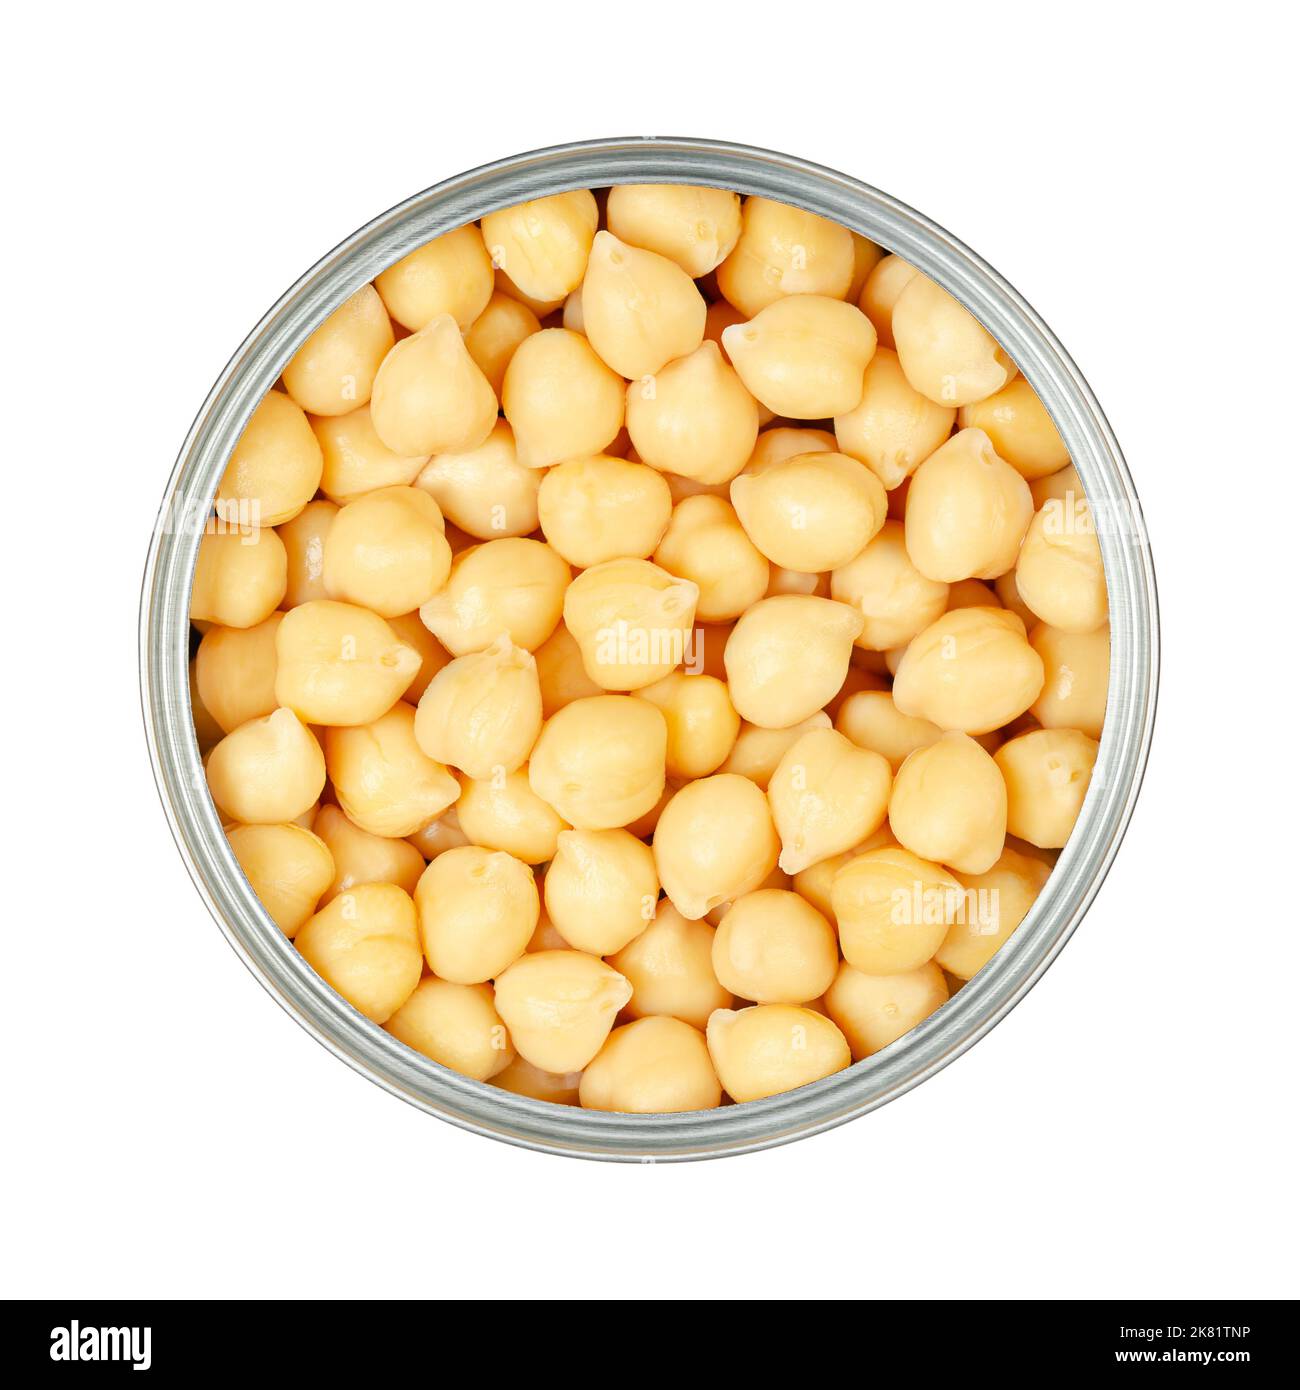 Chickpeas, in an opened can. Cooked and canned chick peas, high in protein, seeds of Cicer arietinum, a legume, also known as garbanzo beans or gram. Stock Photo